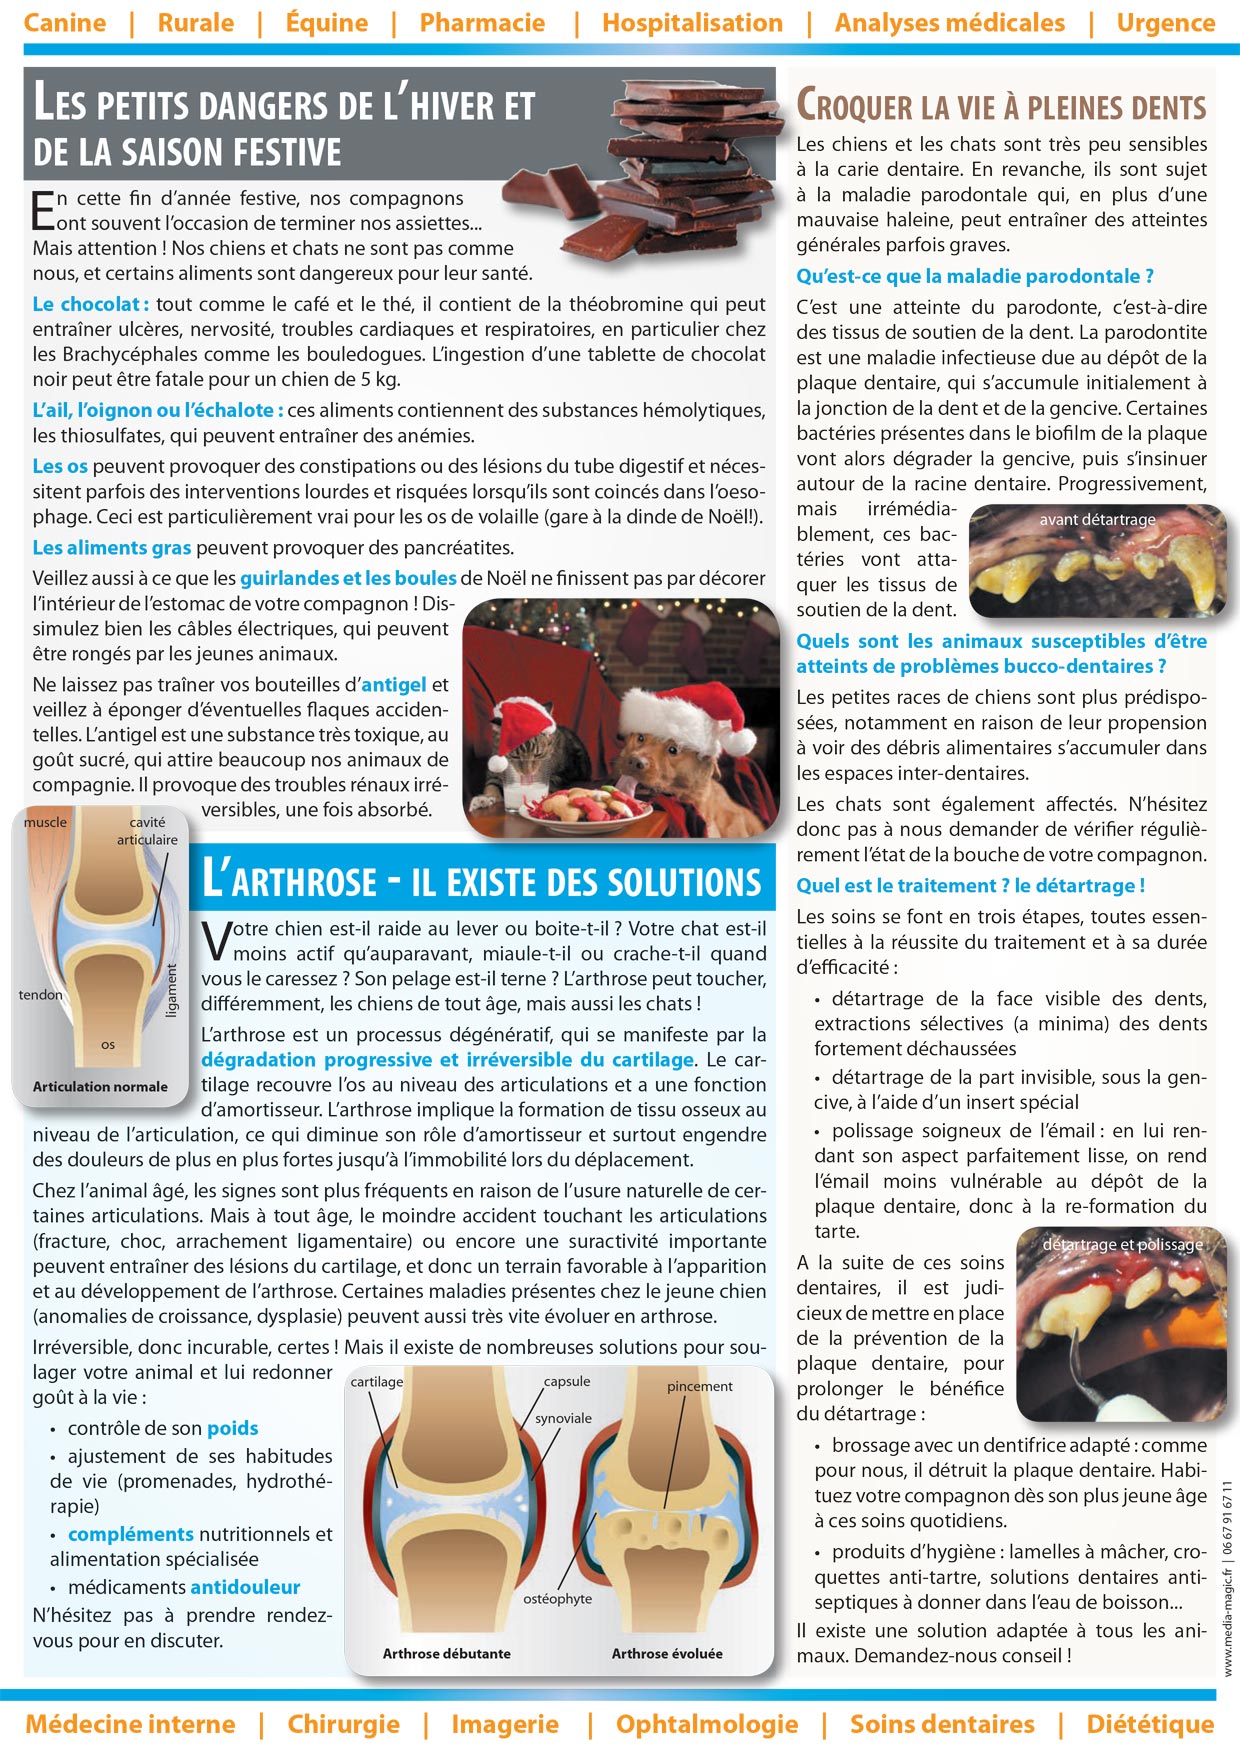 Newsletter - Hiver 2011-12 page 2